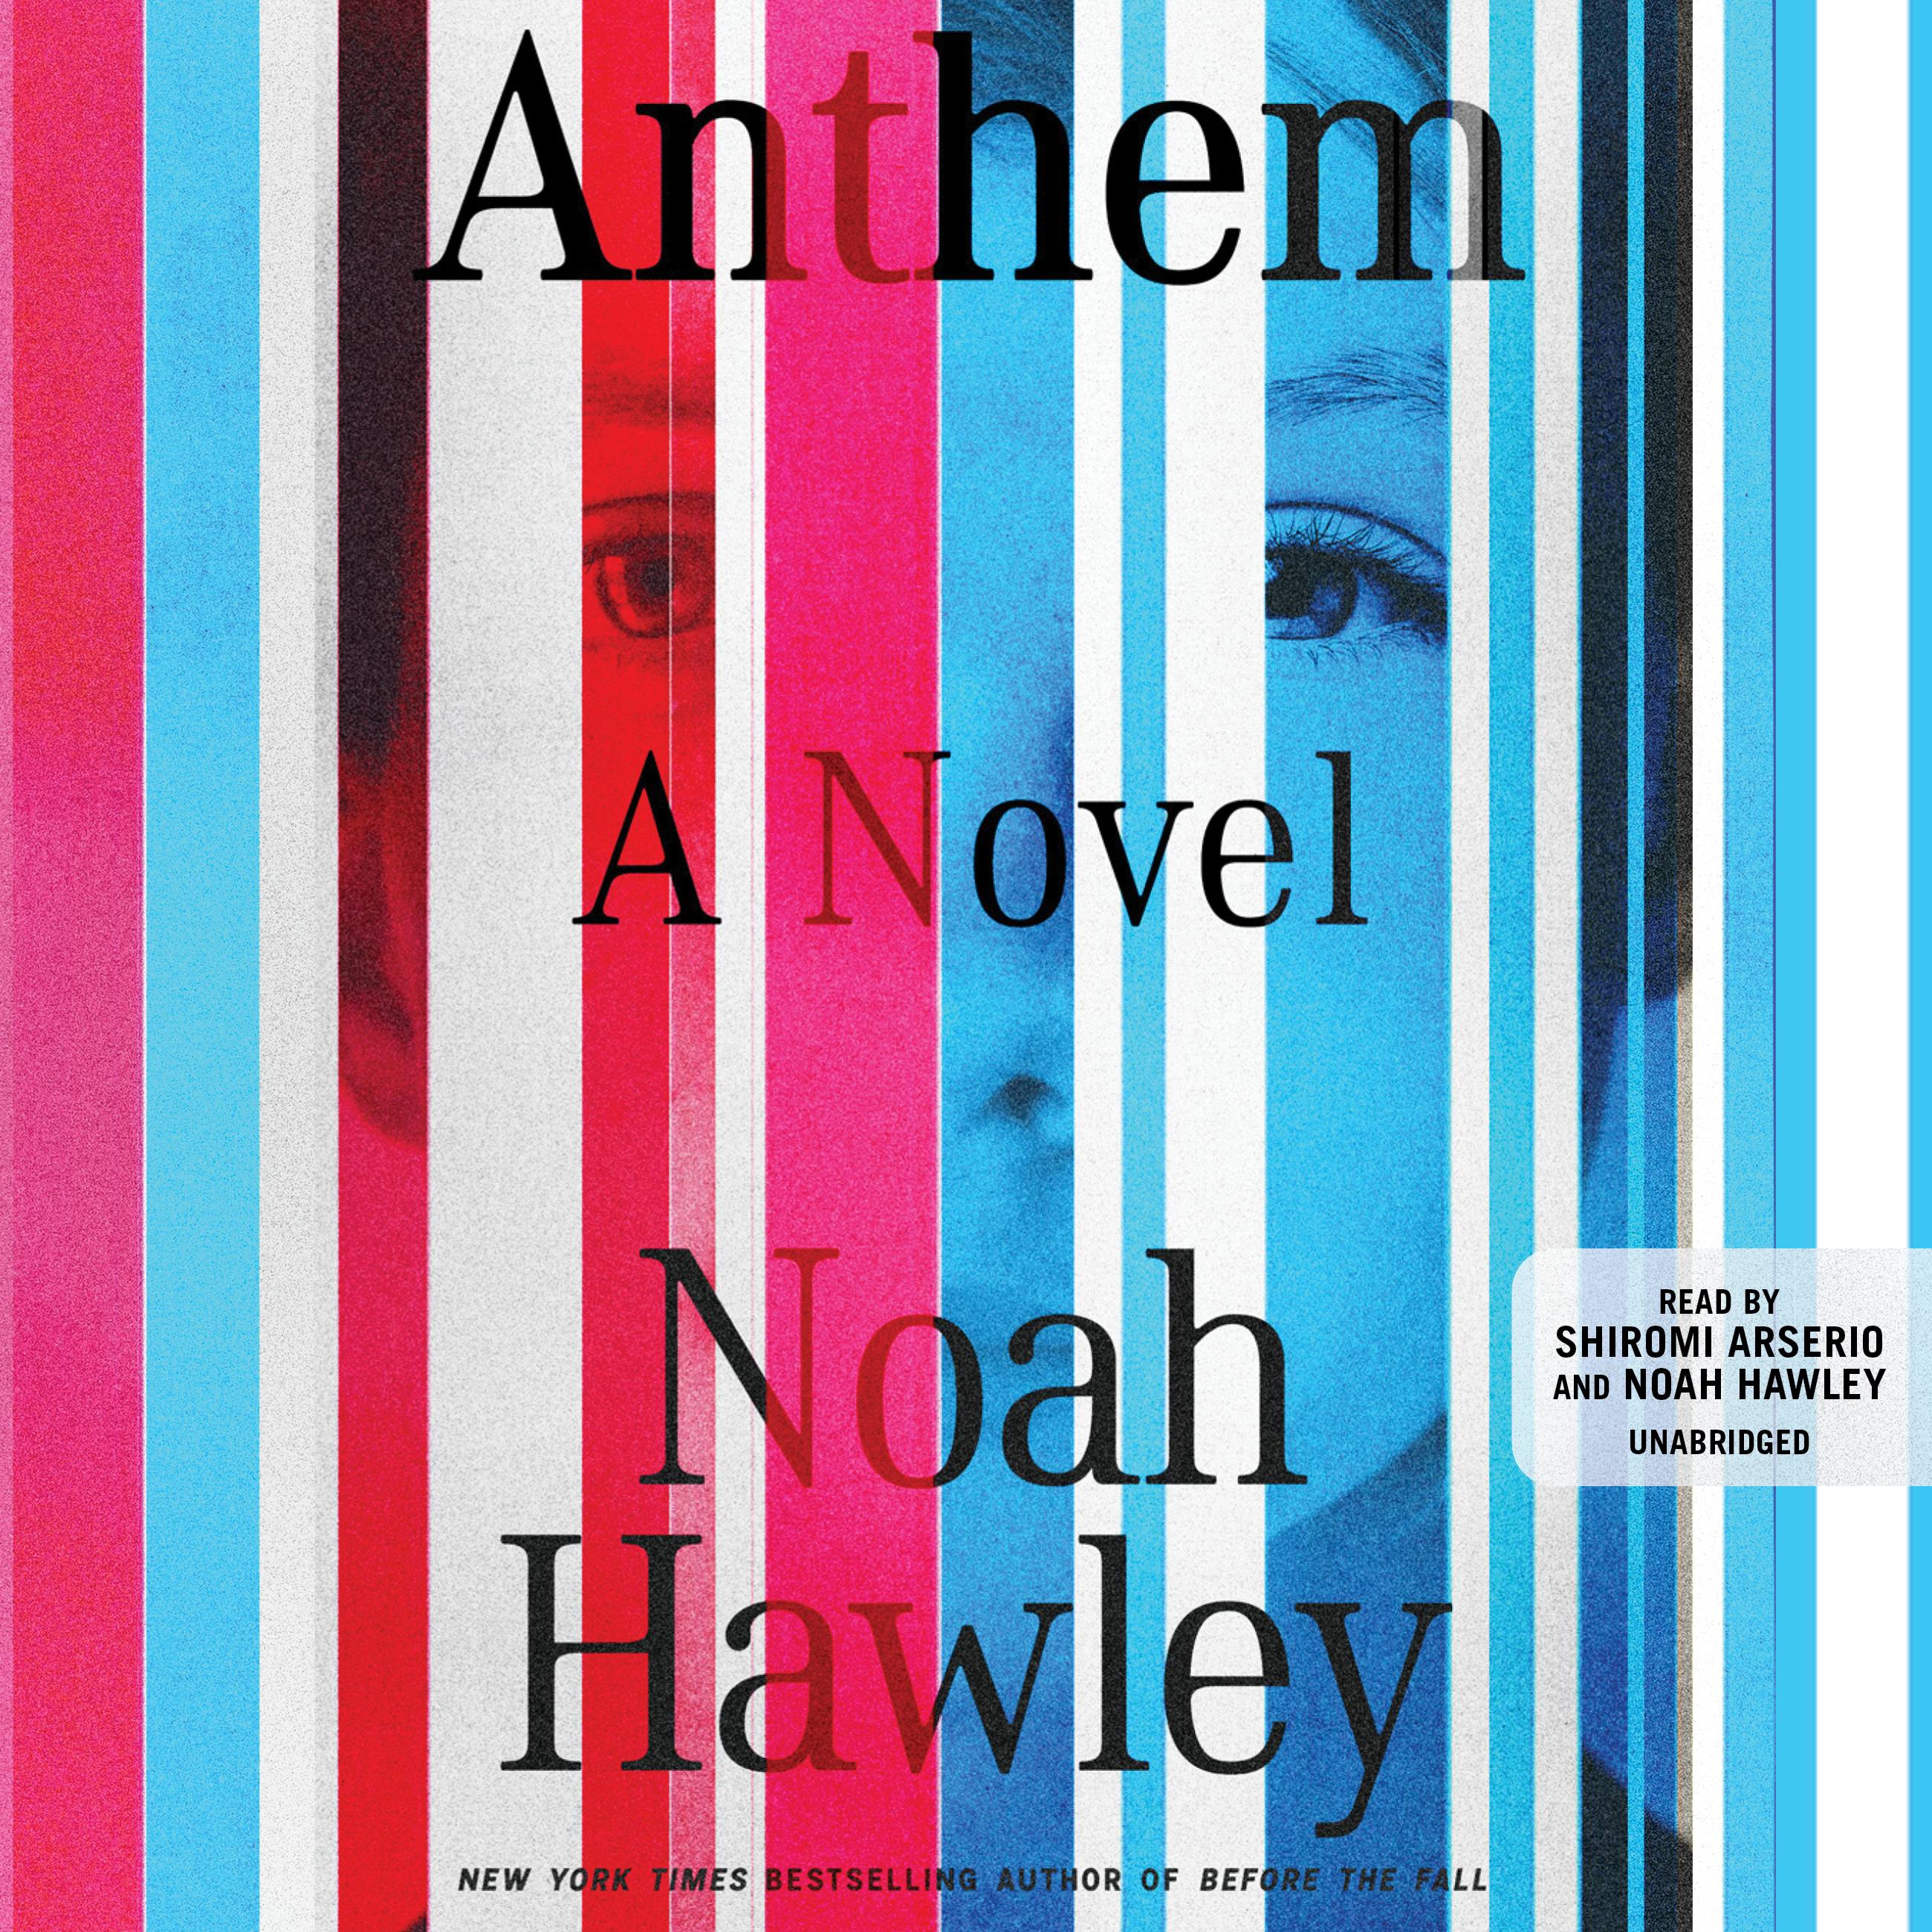 Noah　Anthem　Hawley　by　Hachette　Book　Group